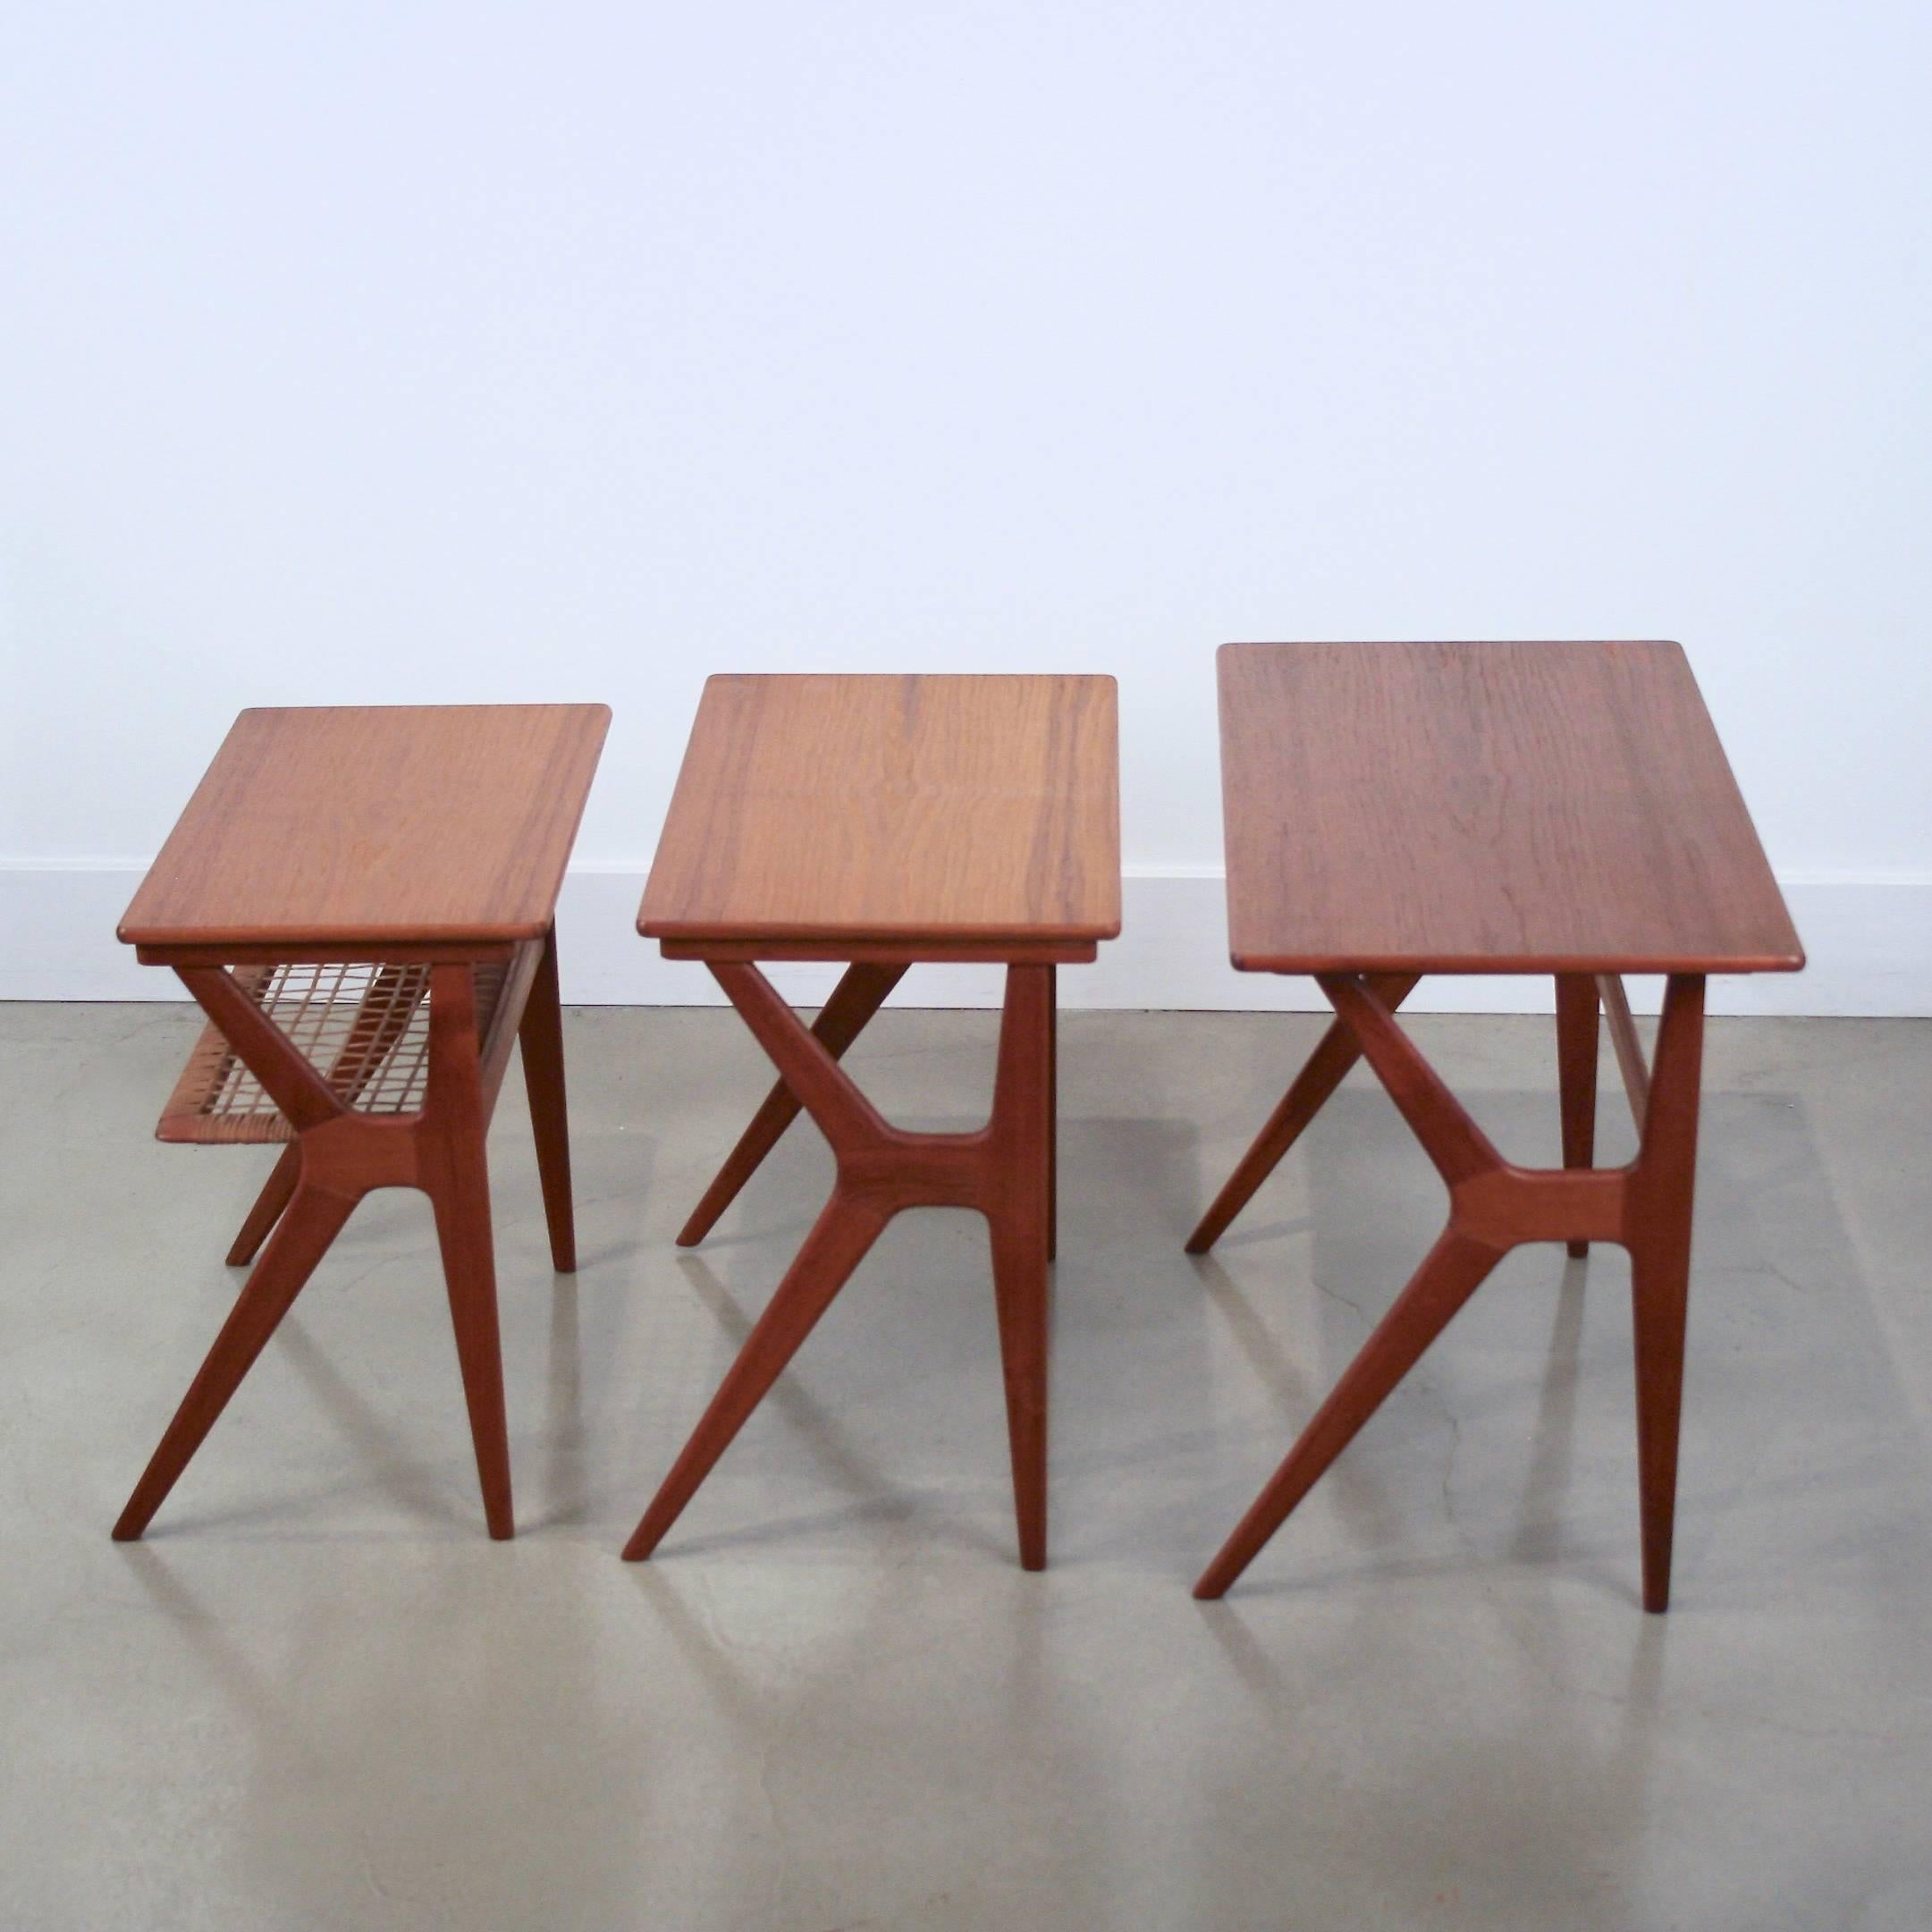 Vintage Danish Teak and Cane Nesting Tables In Excellent Condition For Sale In Vancouver, BC